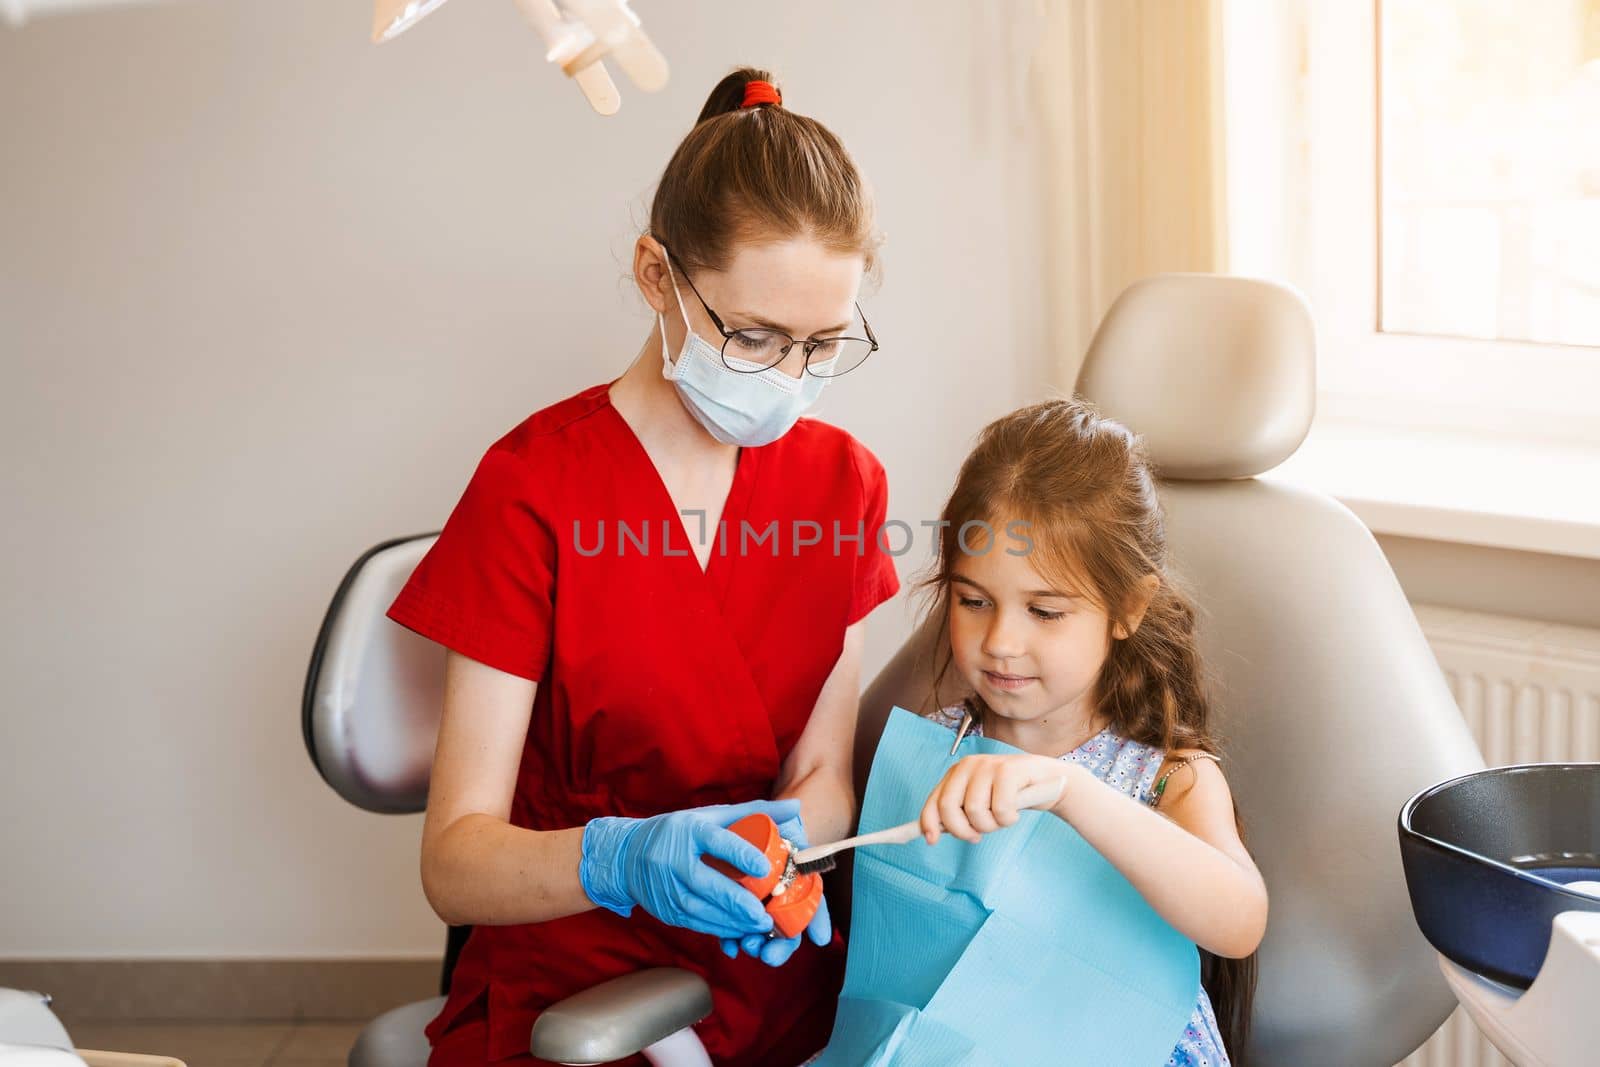 Dentist shows child how to properly use toothbrush for brush teeth. Jaw anatomical model teeth brushing. Pediatric dentist teaching oral hygiene lesson for kids in dentistry